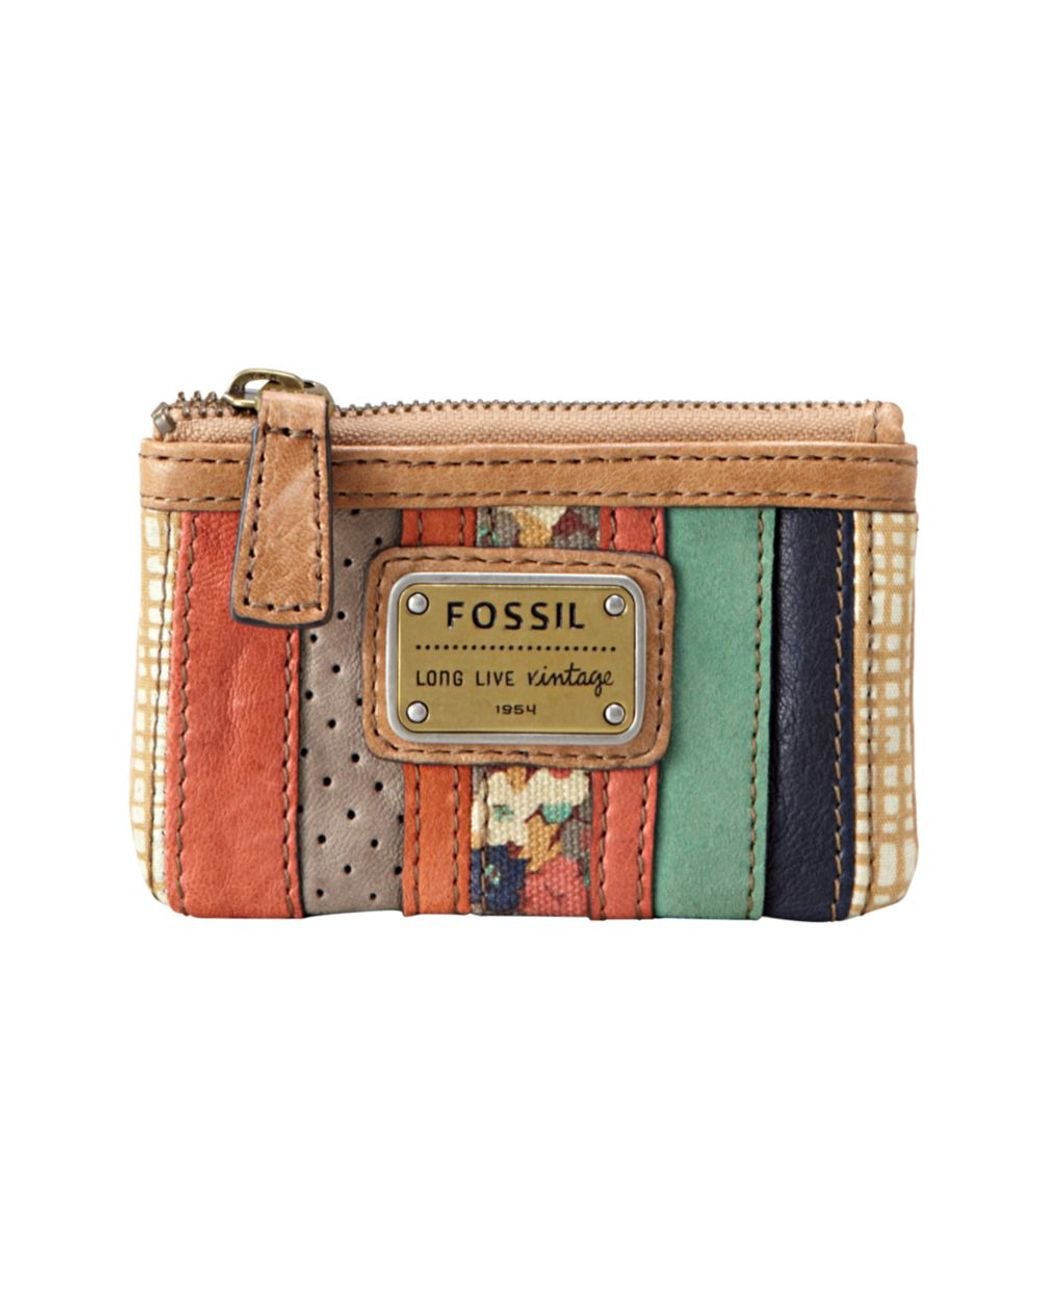 Fossil Emory Zip Coin Purse